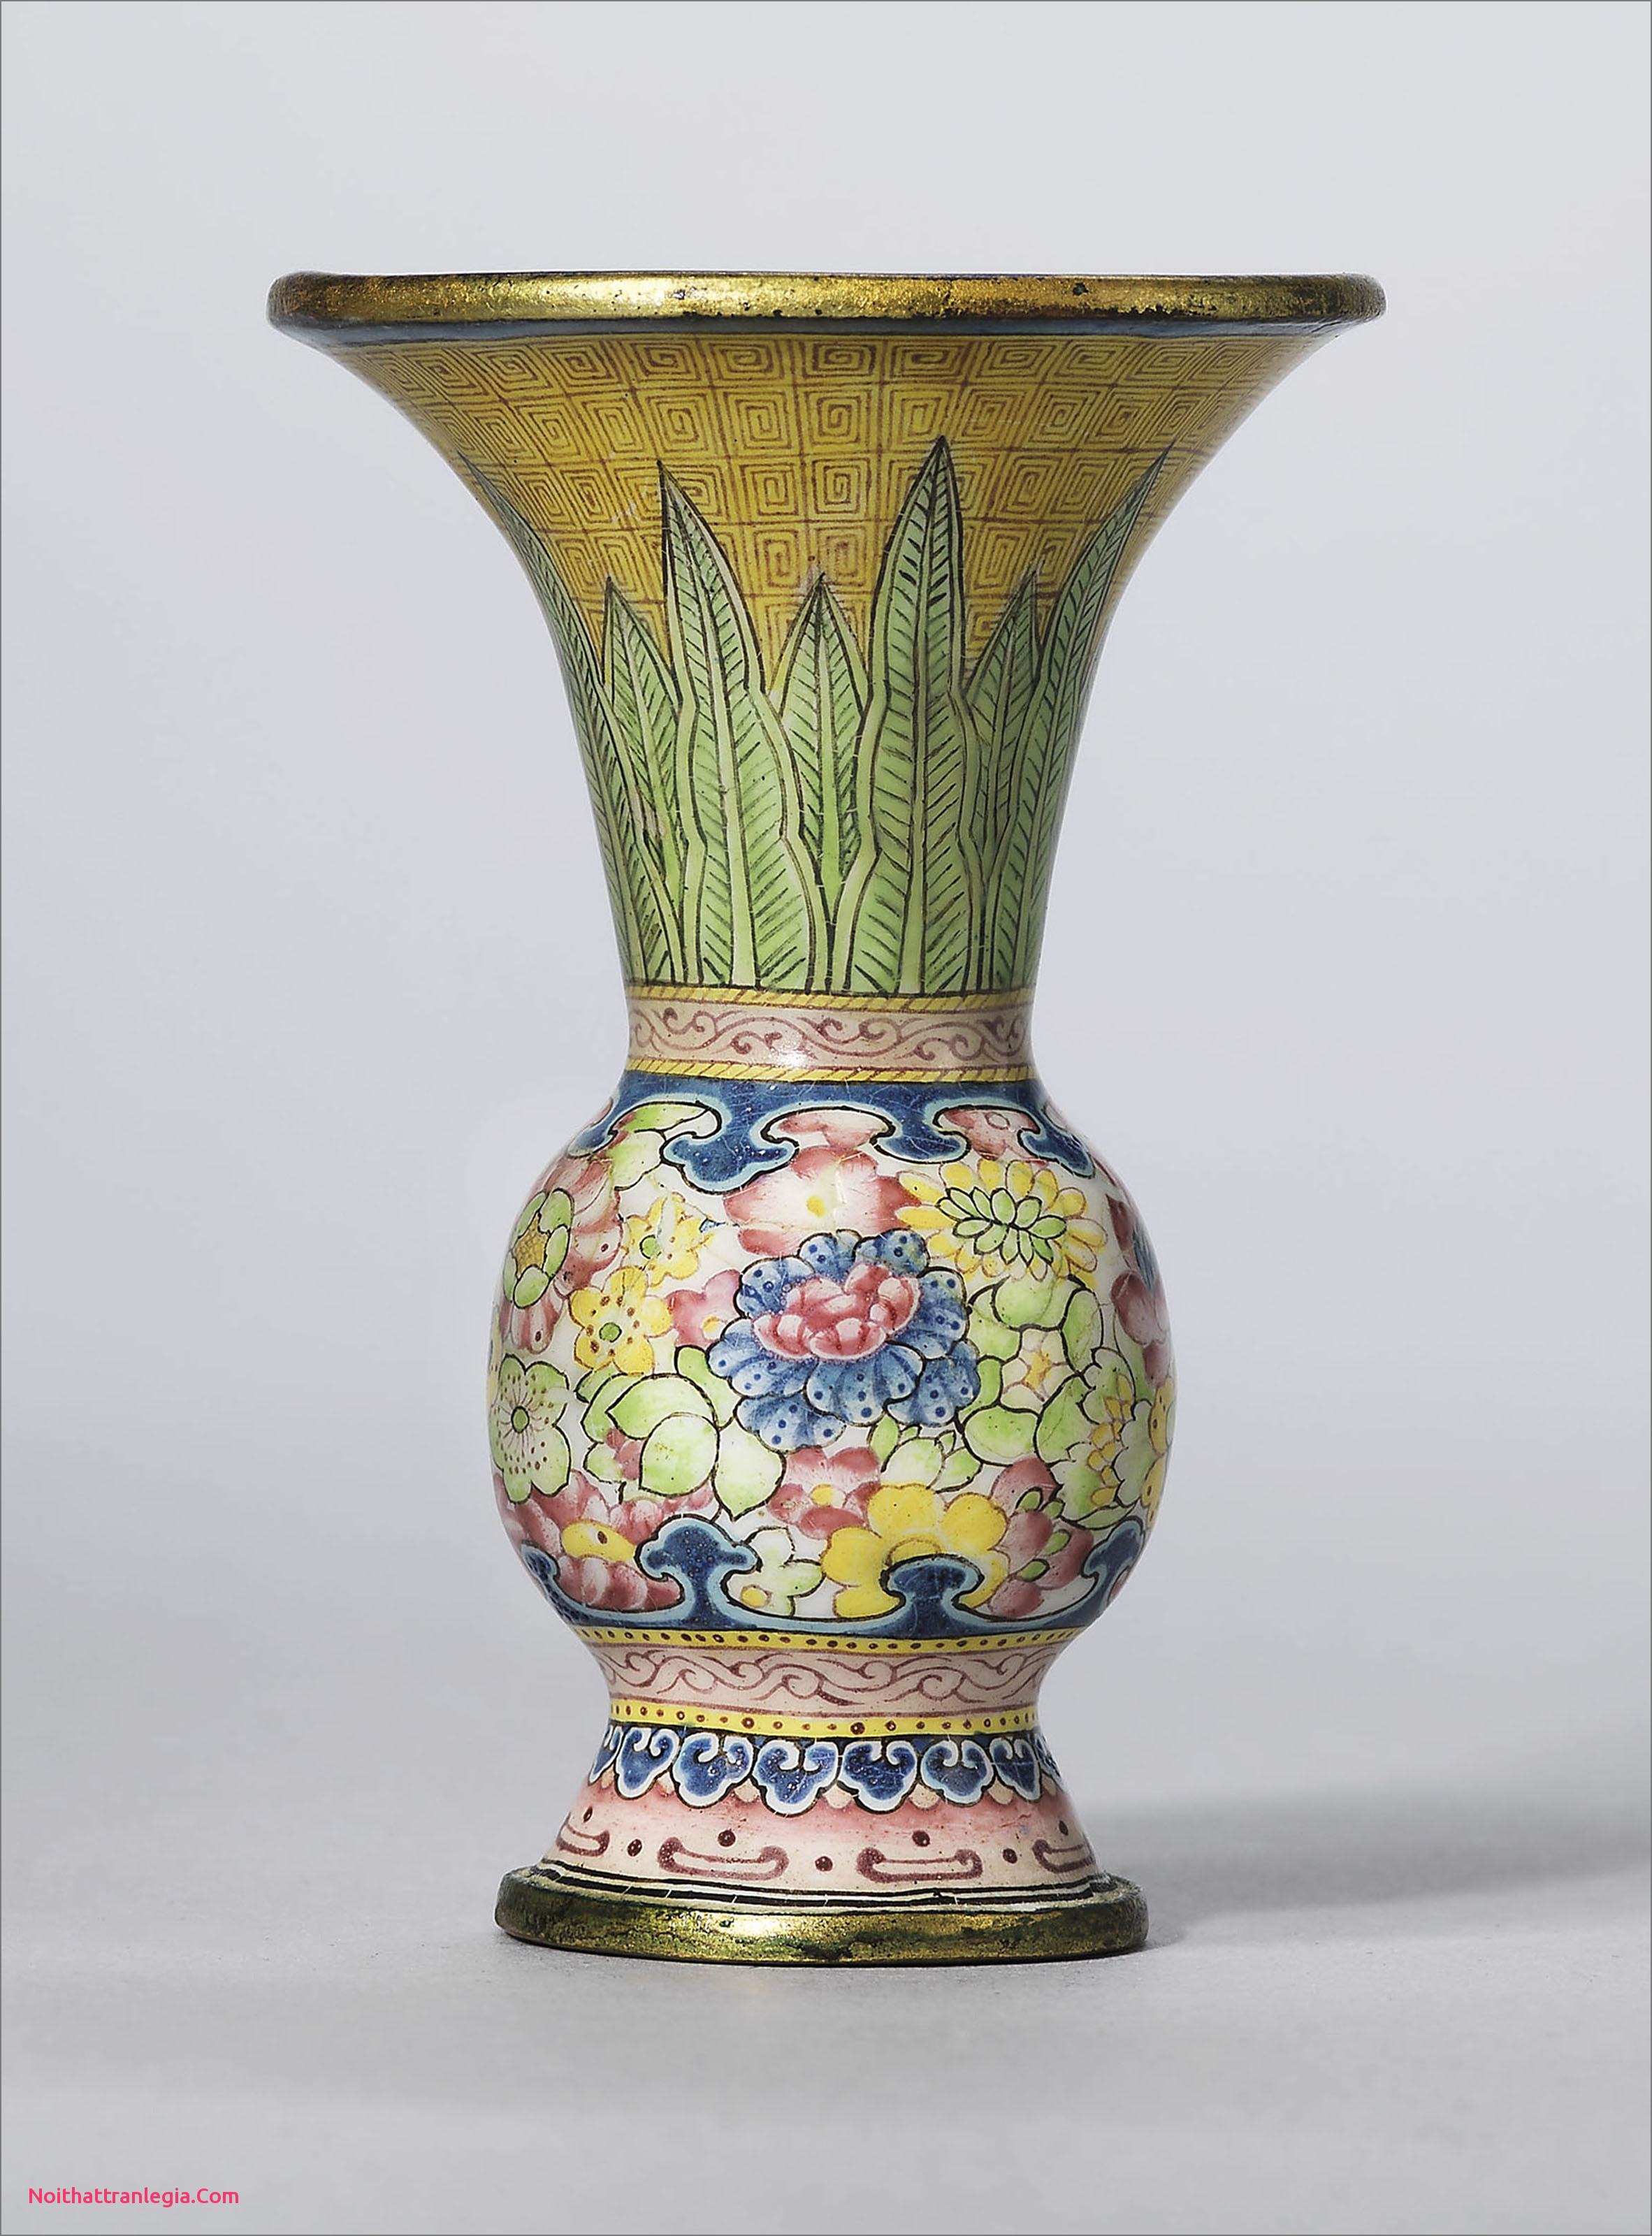 19 Lovely Antique Chinese Glass Vase 2024 free download antique chinese glass vase of 20 chinese antique vase noithattranlegia vases design for chinese antique vase unique a guide to the symbolism of flowers on chinese ceramics of chinese antique